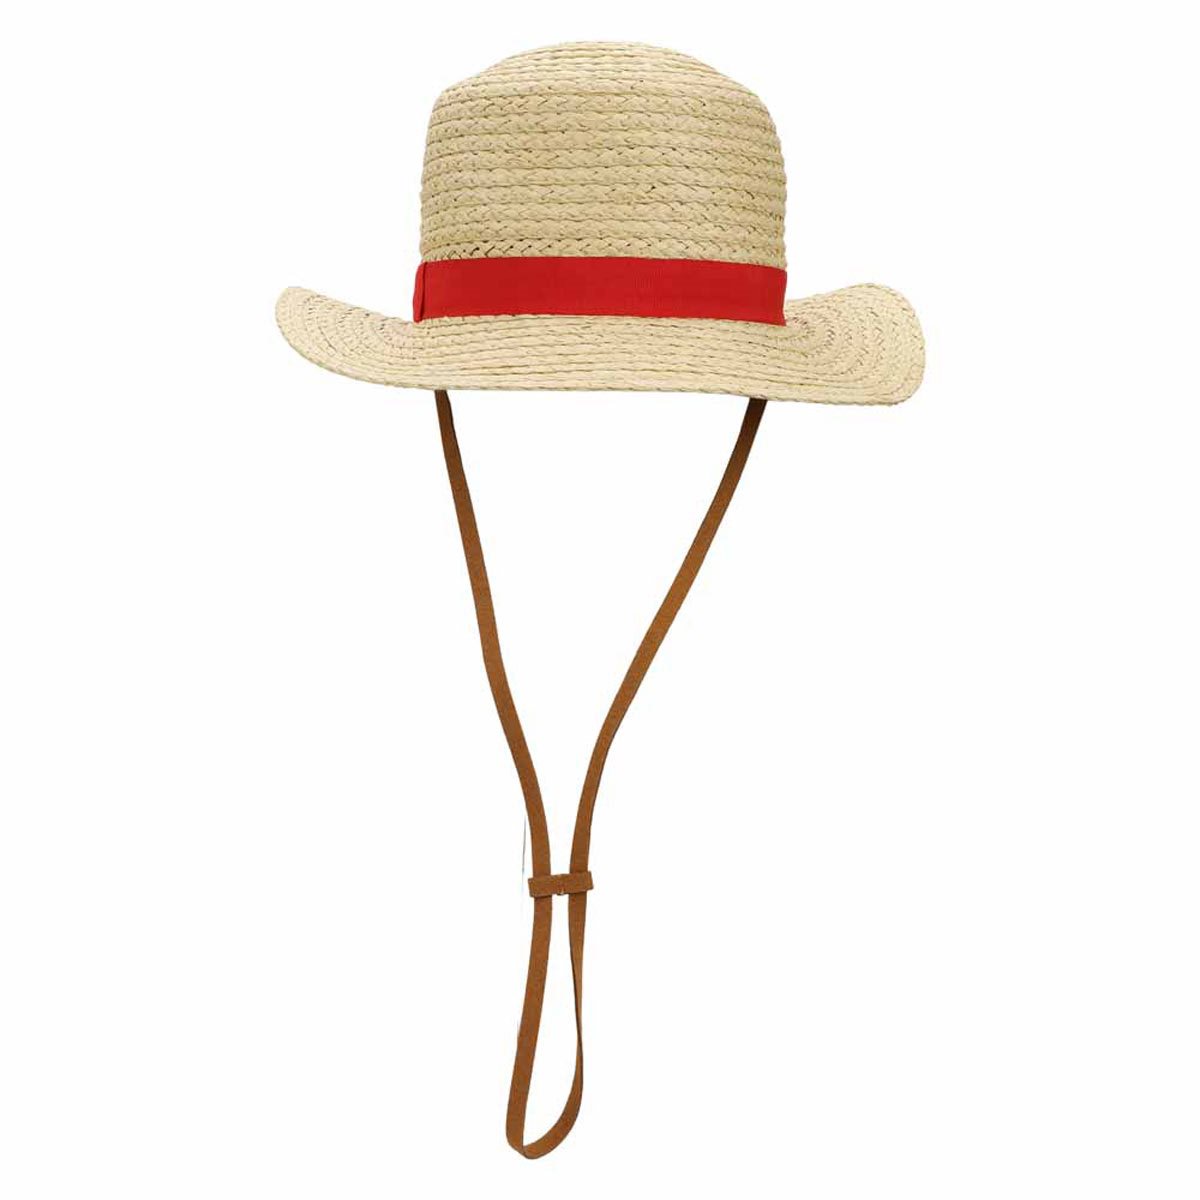 Buy Luffy's Replica Straw Hat from One Piece (Free Shipping